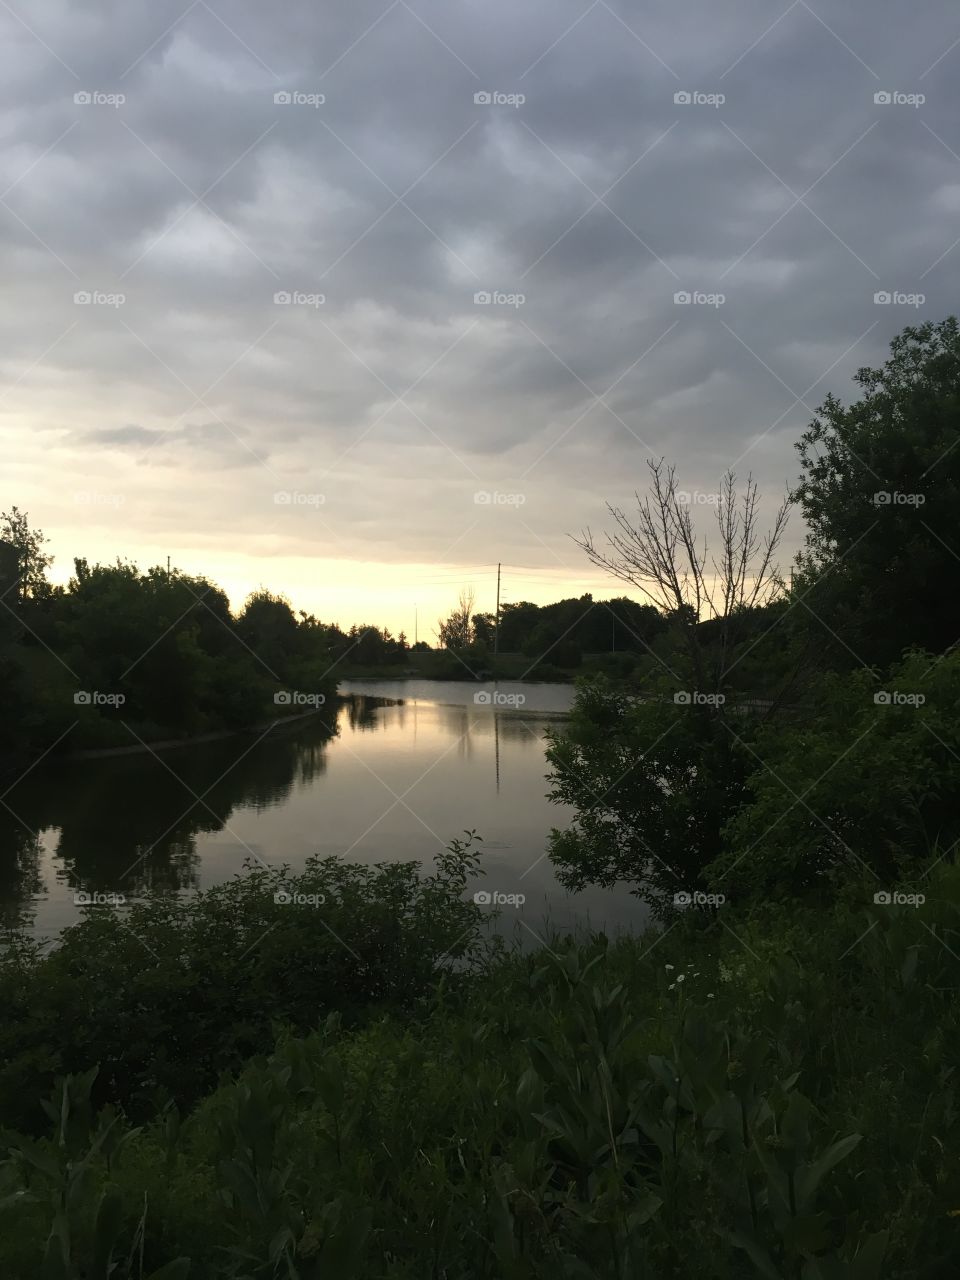 A beautiful sunset over looking a pond located in a neighbourhood.